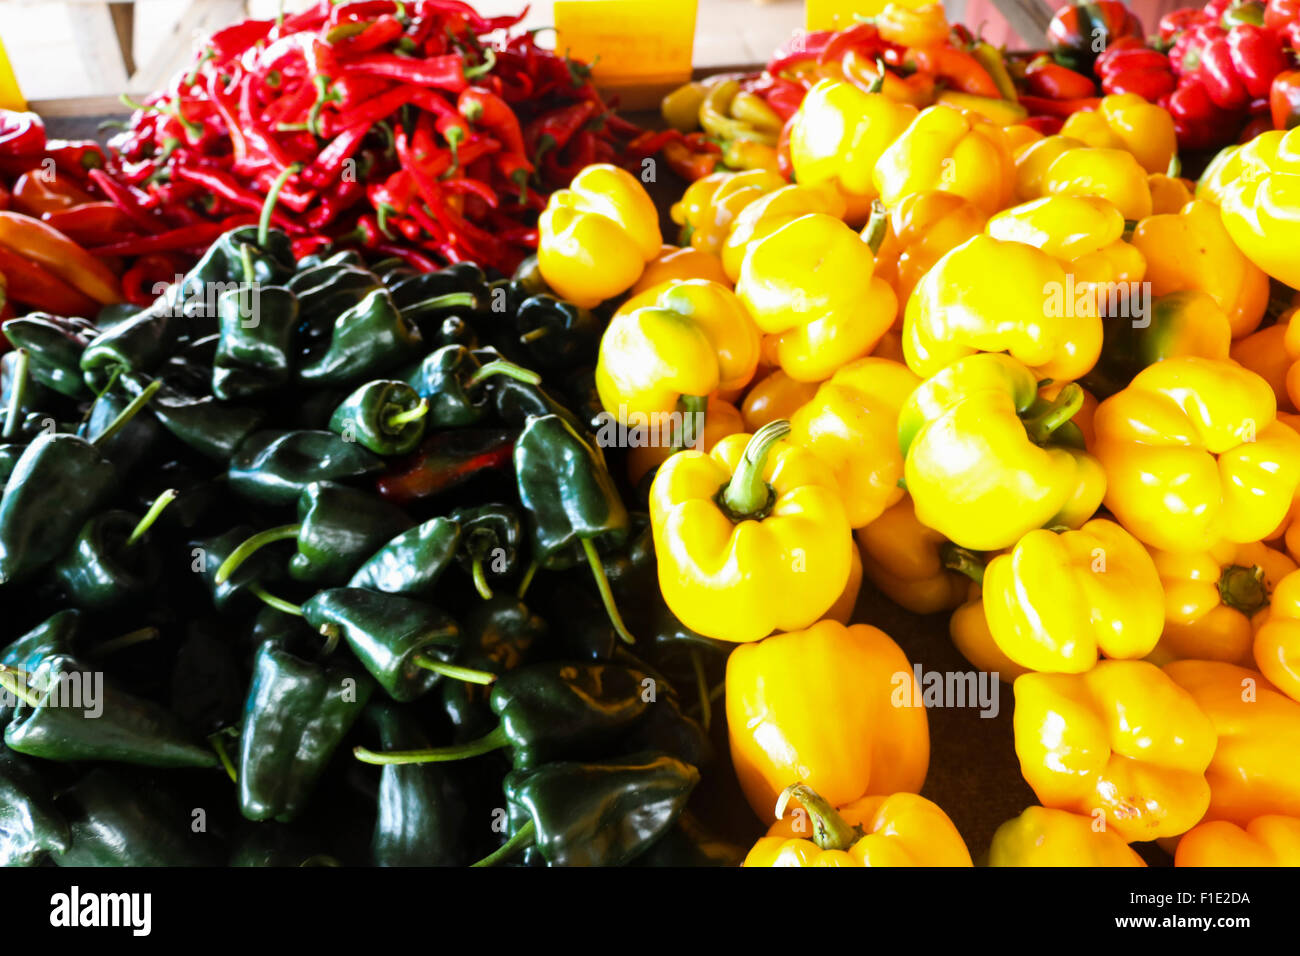 Variety of sweet and hot peppers at a farm stand Stock Photo